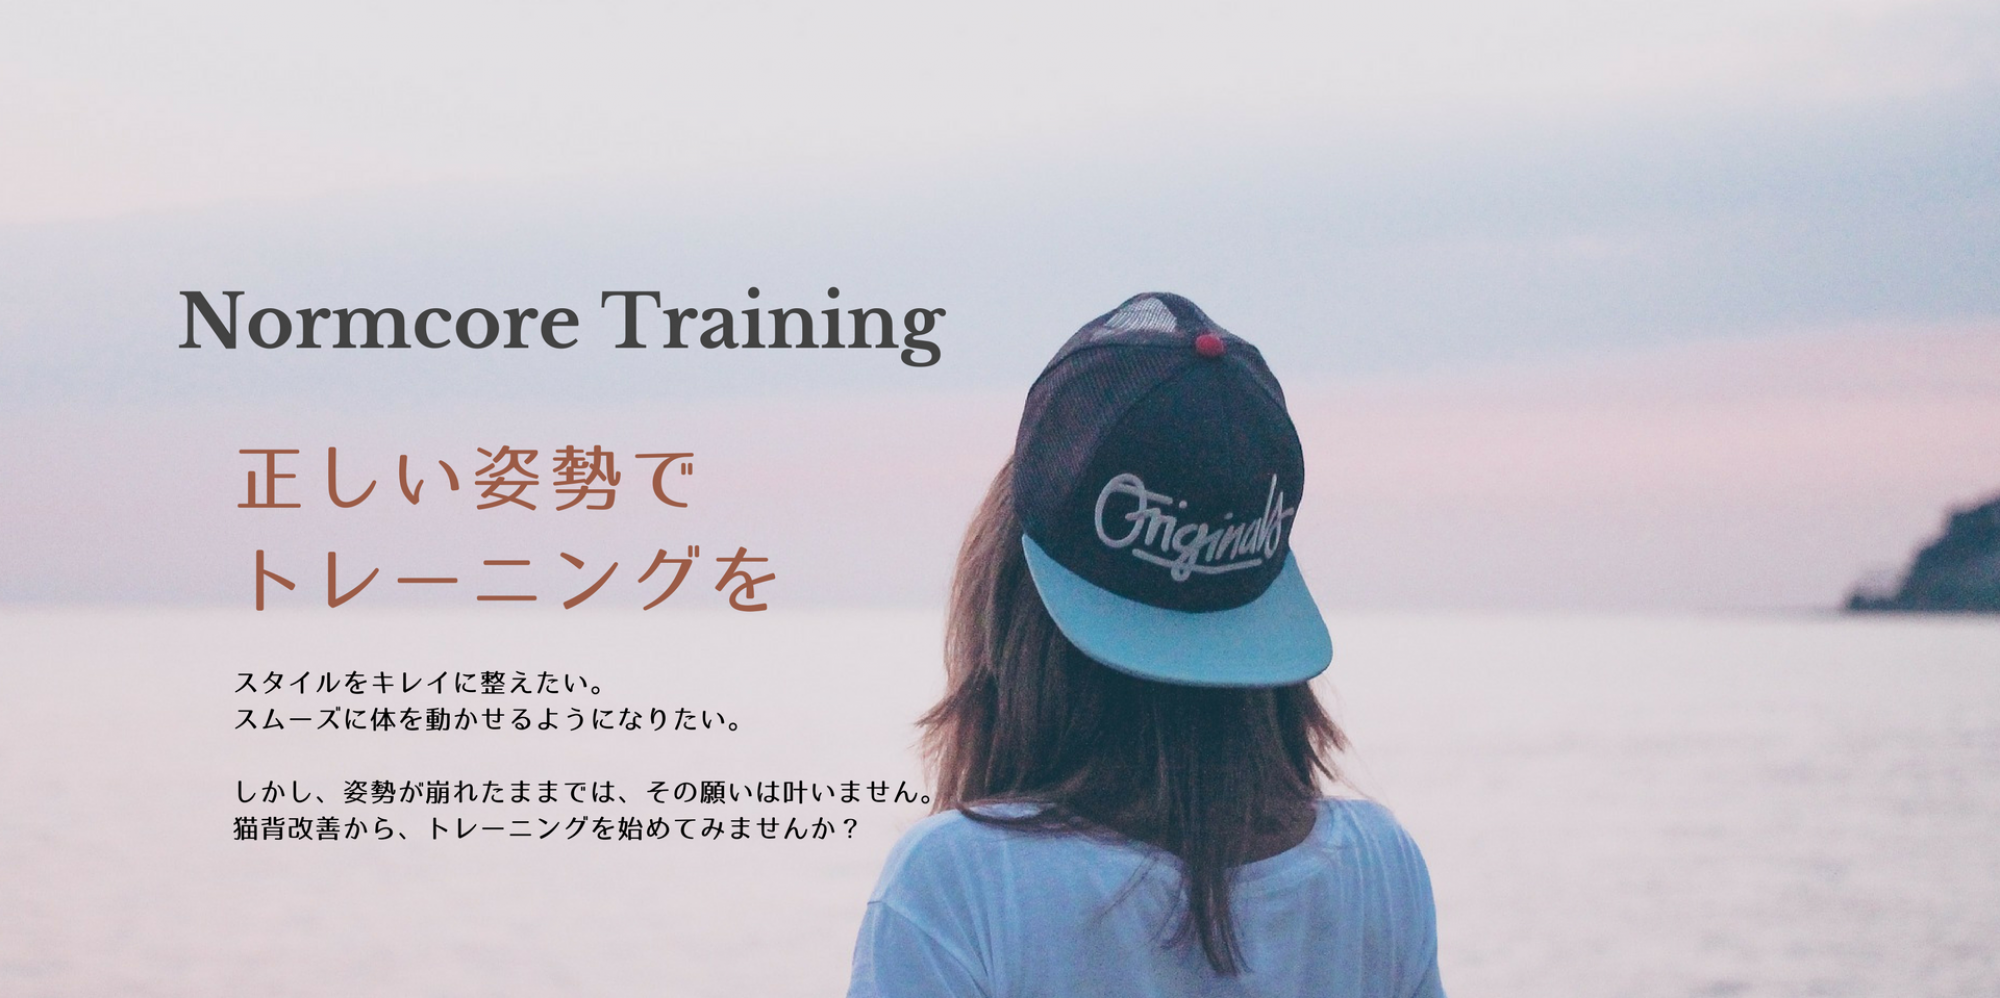 cropped-Normcore-Training-header3.png